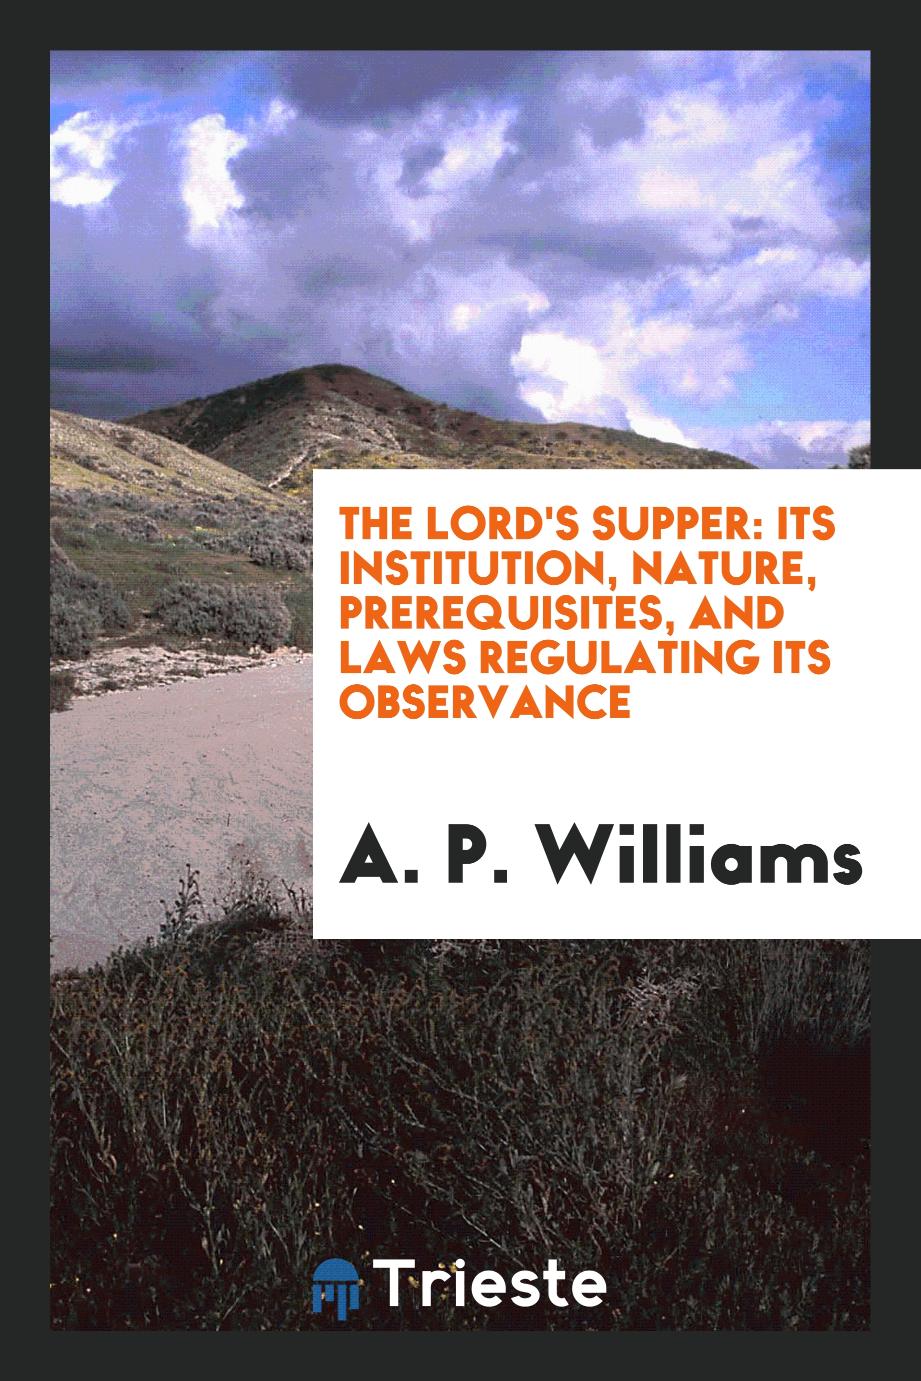 The Lord's Supper: Its Institution, Nature, Prerequisites, and Laws Regulating Its Observance